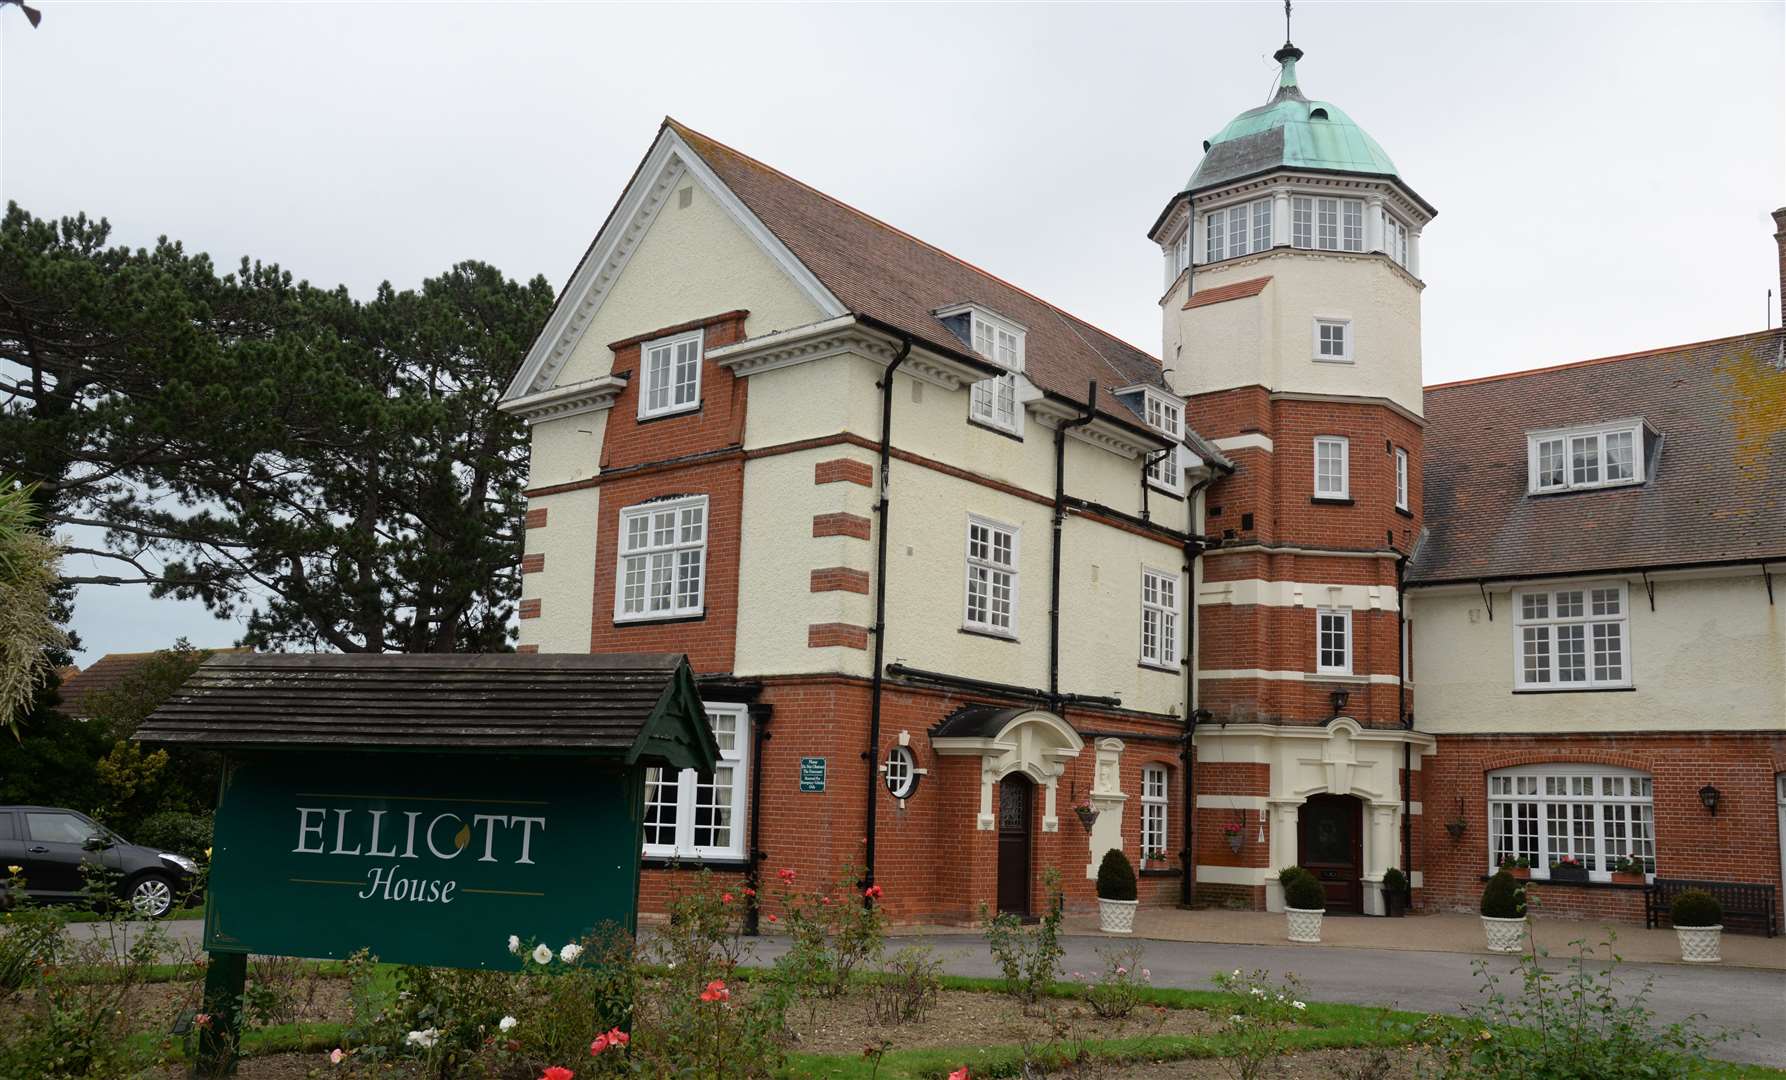 Bosses from Elliott House care home in Herne Bay announced it would close just days after Care Quality Commission inspectors visited the site